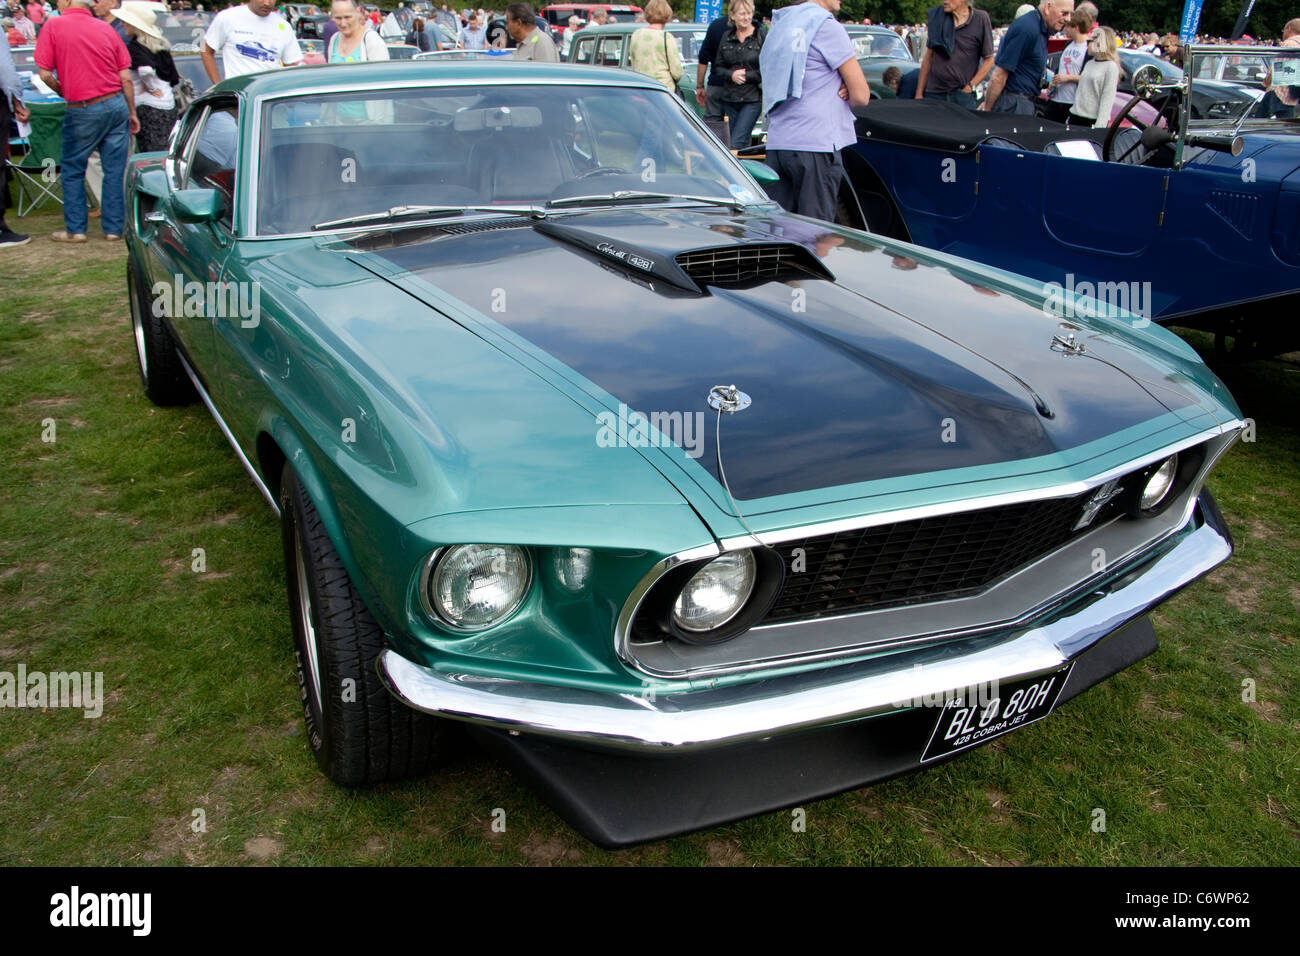 Classics on the Common Harpenden 2011 USA Ford Mustang classic car green Mach 1 1969 Cobra jet 428 muscle Stock Photo